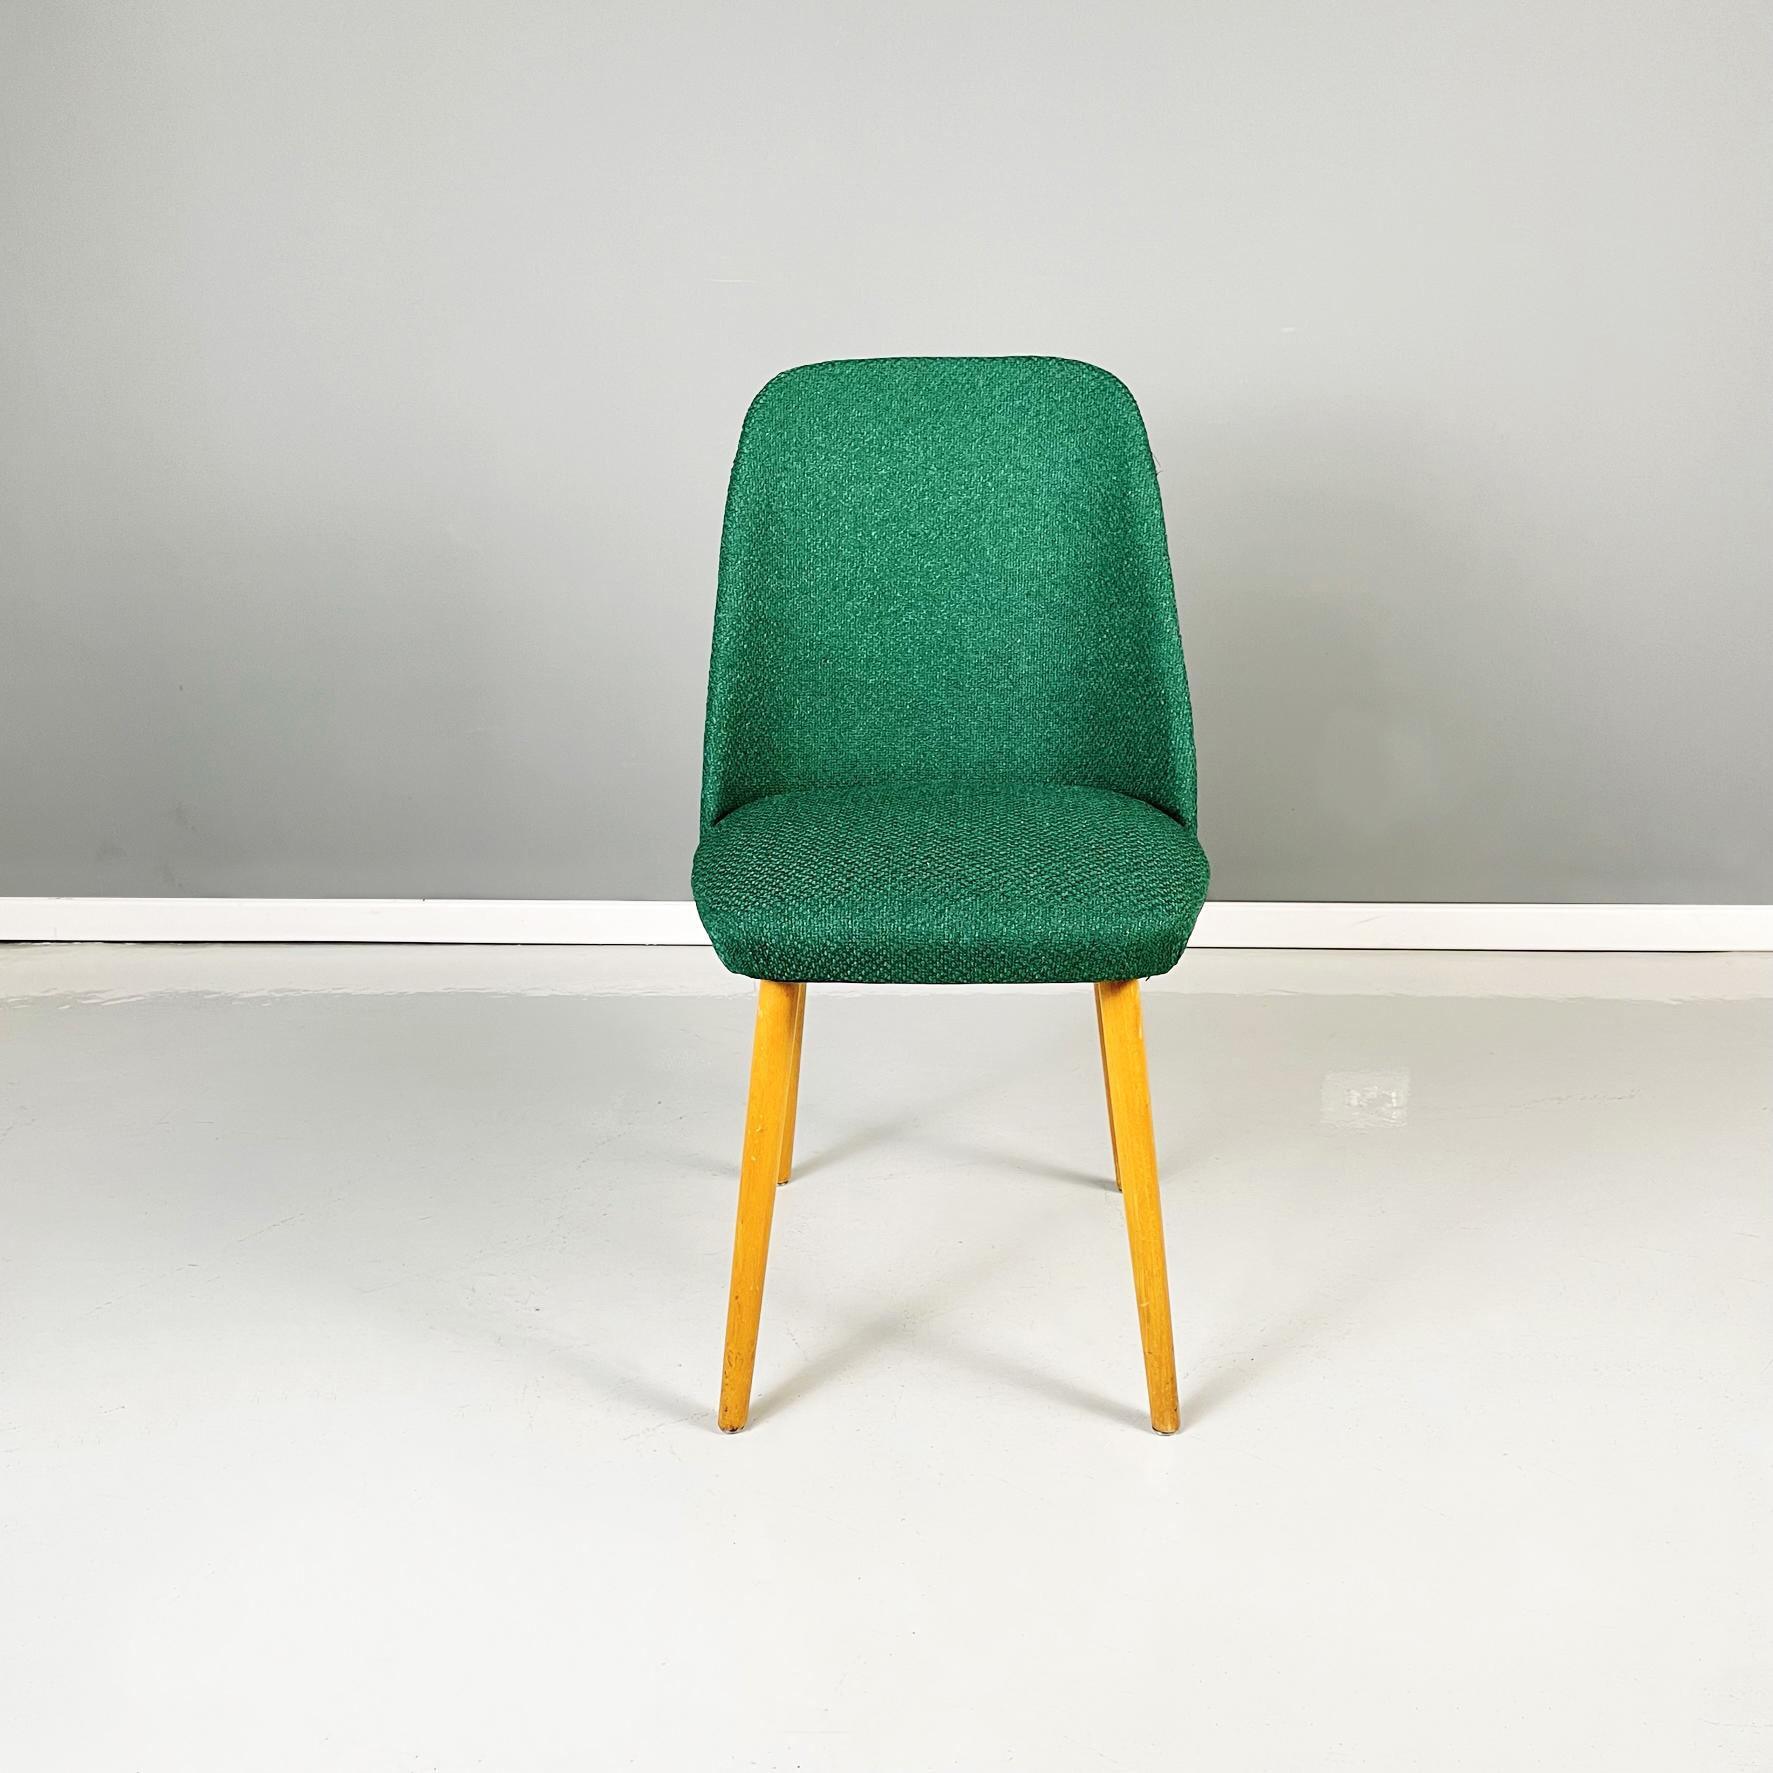 Italian Mid-Century Modern Chairs in Forest Green Fabric and Wood, 1960s In Good Condition For Sale In MIlano, IT